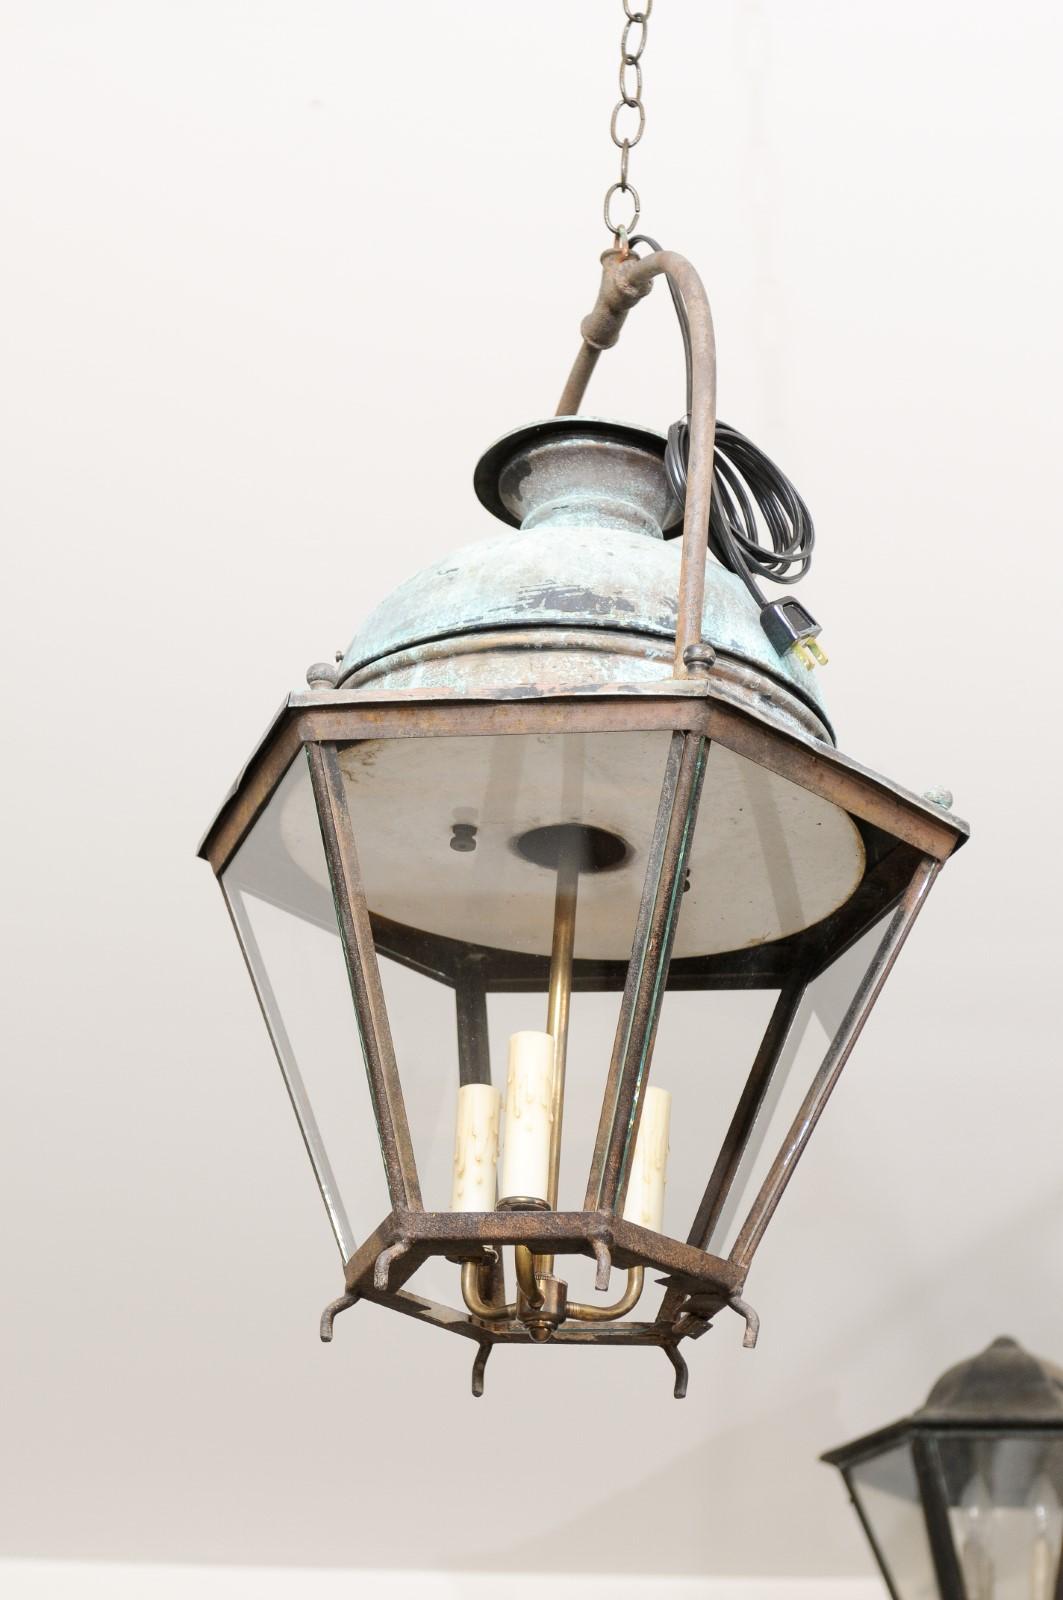 20th Century Turn of the Century French Provençal 1900s Copper and Iron Hexagonal Lantern